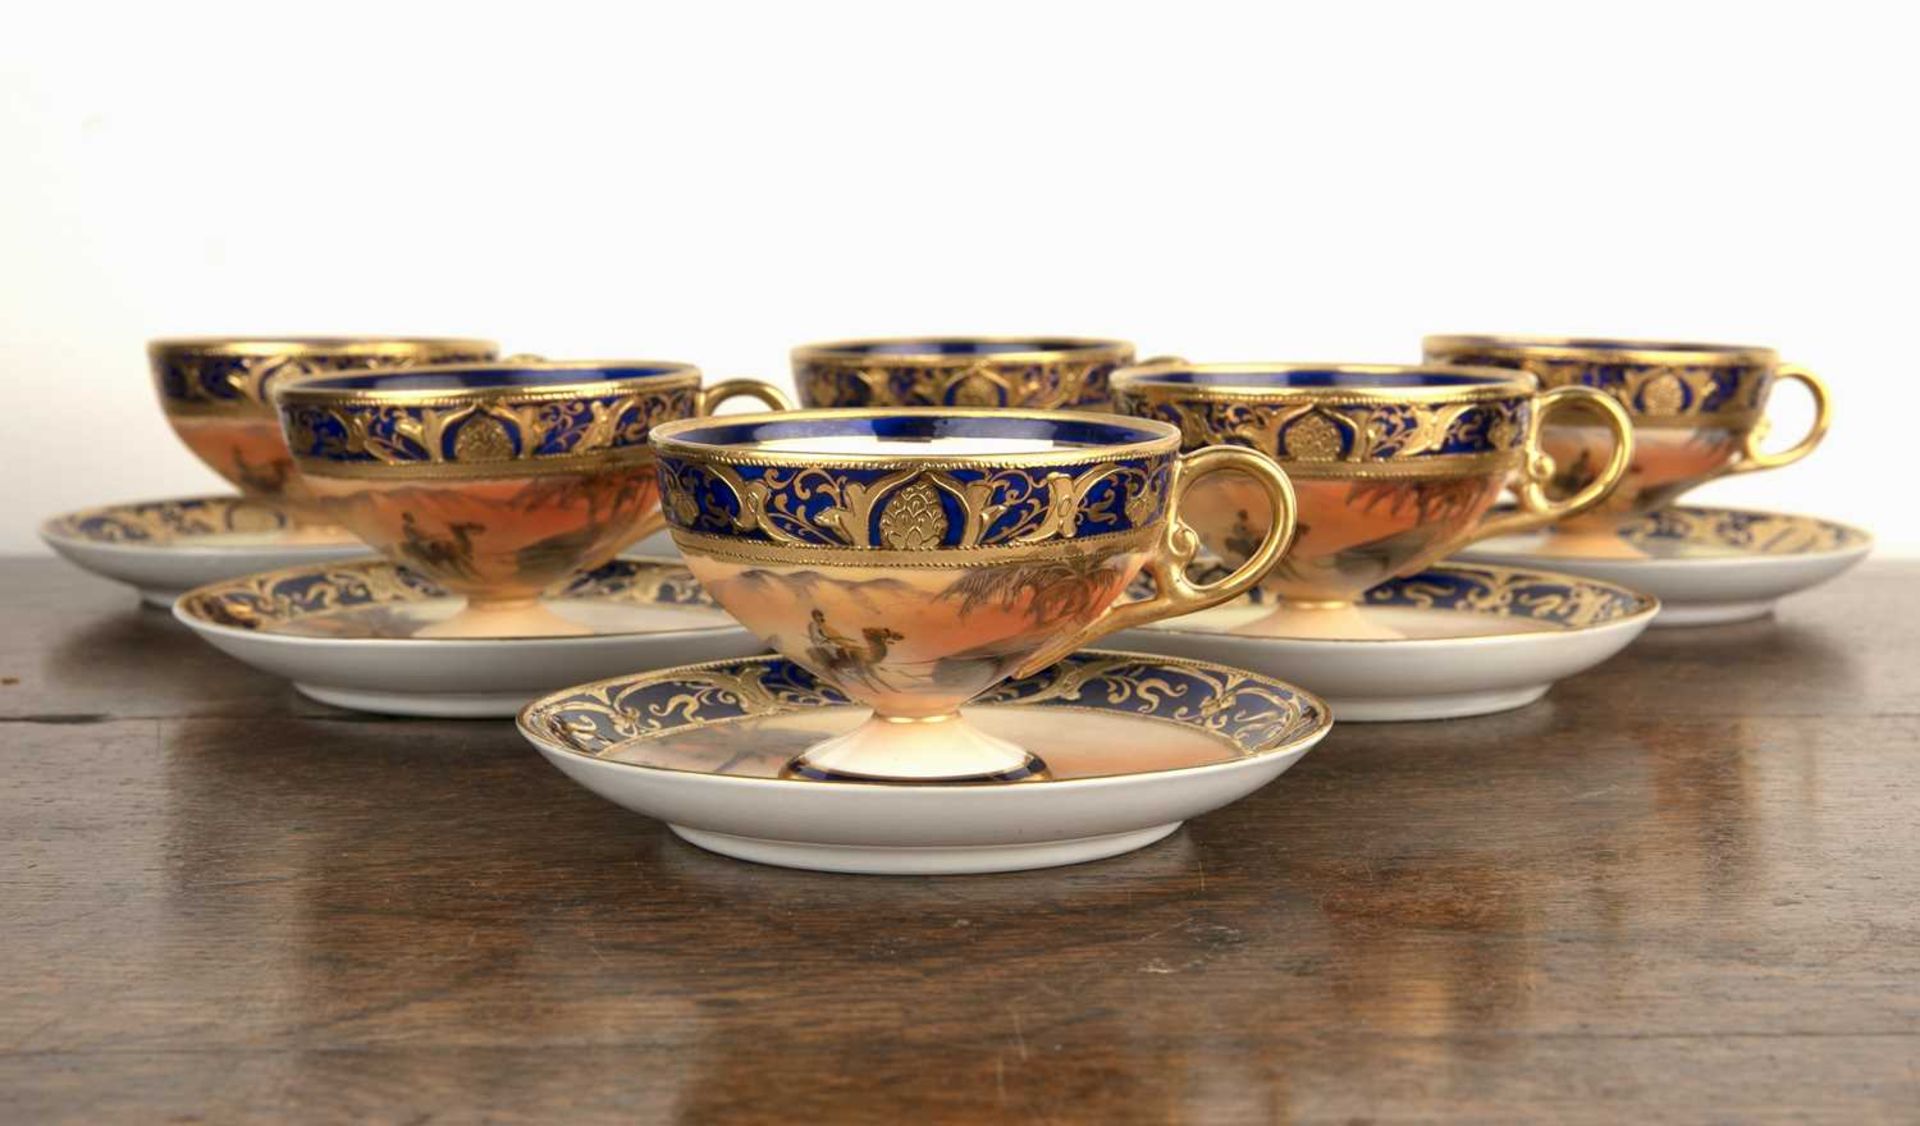 Cased Noritake porcelain tea set comprising of six cabinet teacups and saucers, decorated with - Image 2 of 3